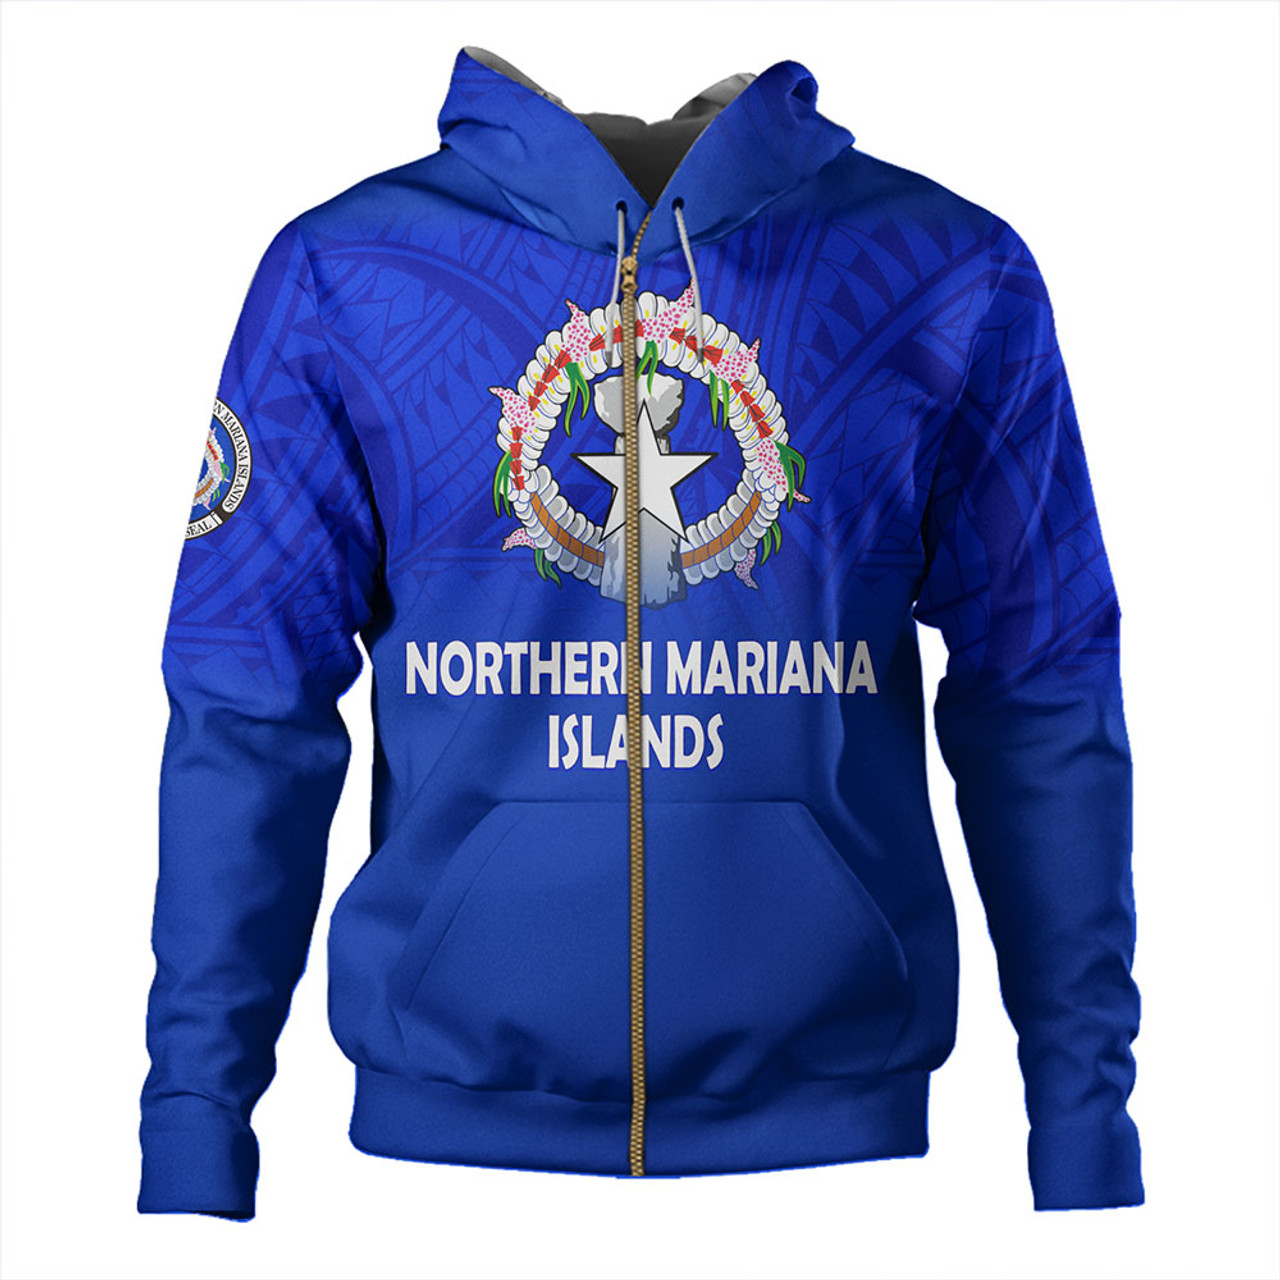 Northern Mariana Islands Hoodie - Flag Color With Traditional Patterns